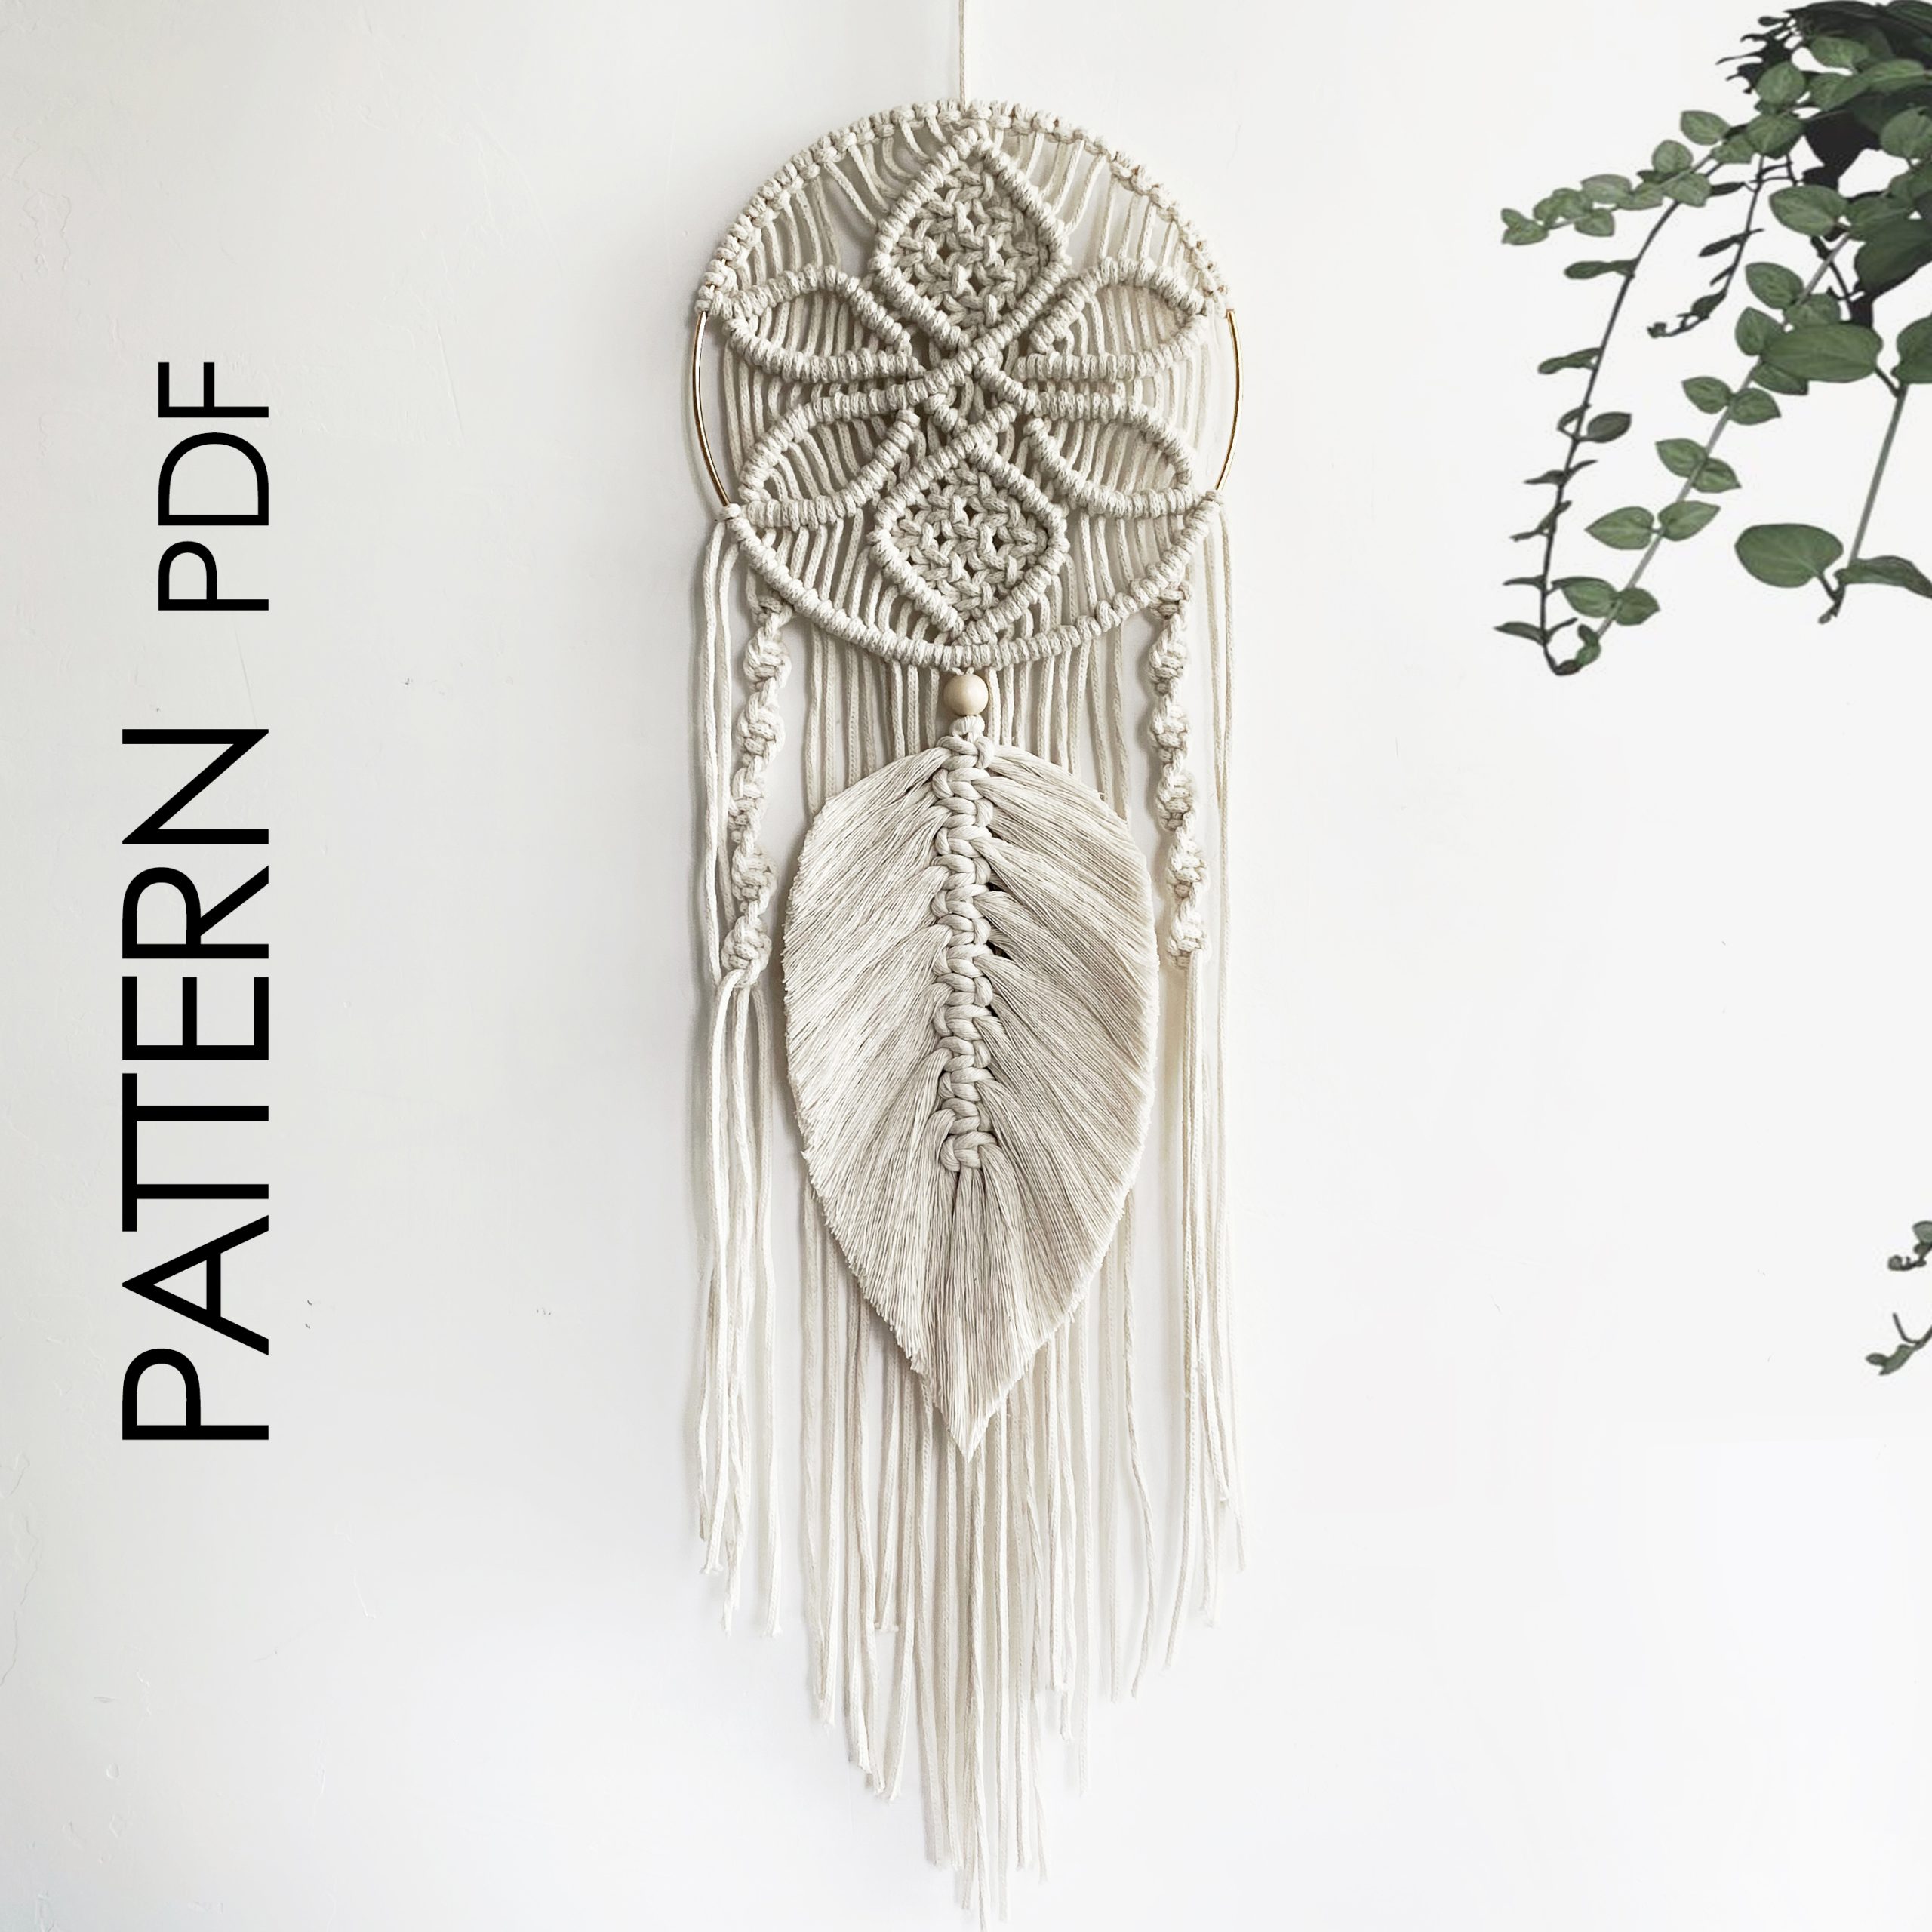 Macrame Wall Hanging Pattern. Instant Download Pdf & Free Knot Guide. DIY  Macrame Tutorial Step by Step Pattern. DIY Boho Wall Home Decor. 